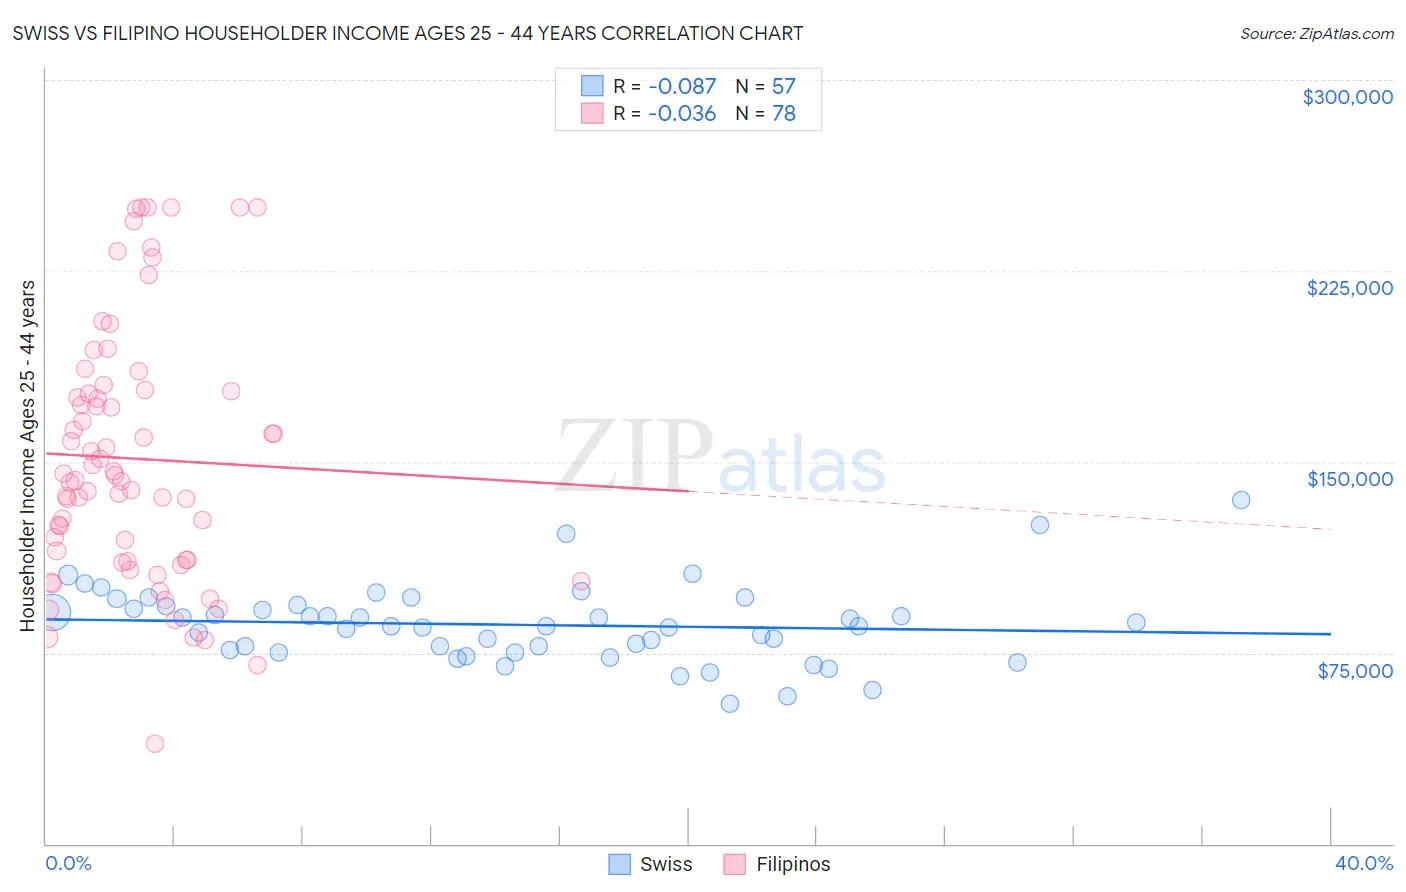 Swiss vs Filipino Householder Income Ages 25 - 44 years